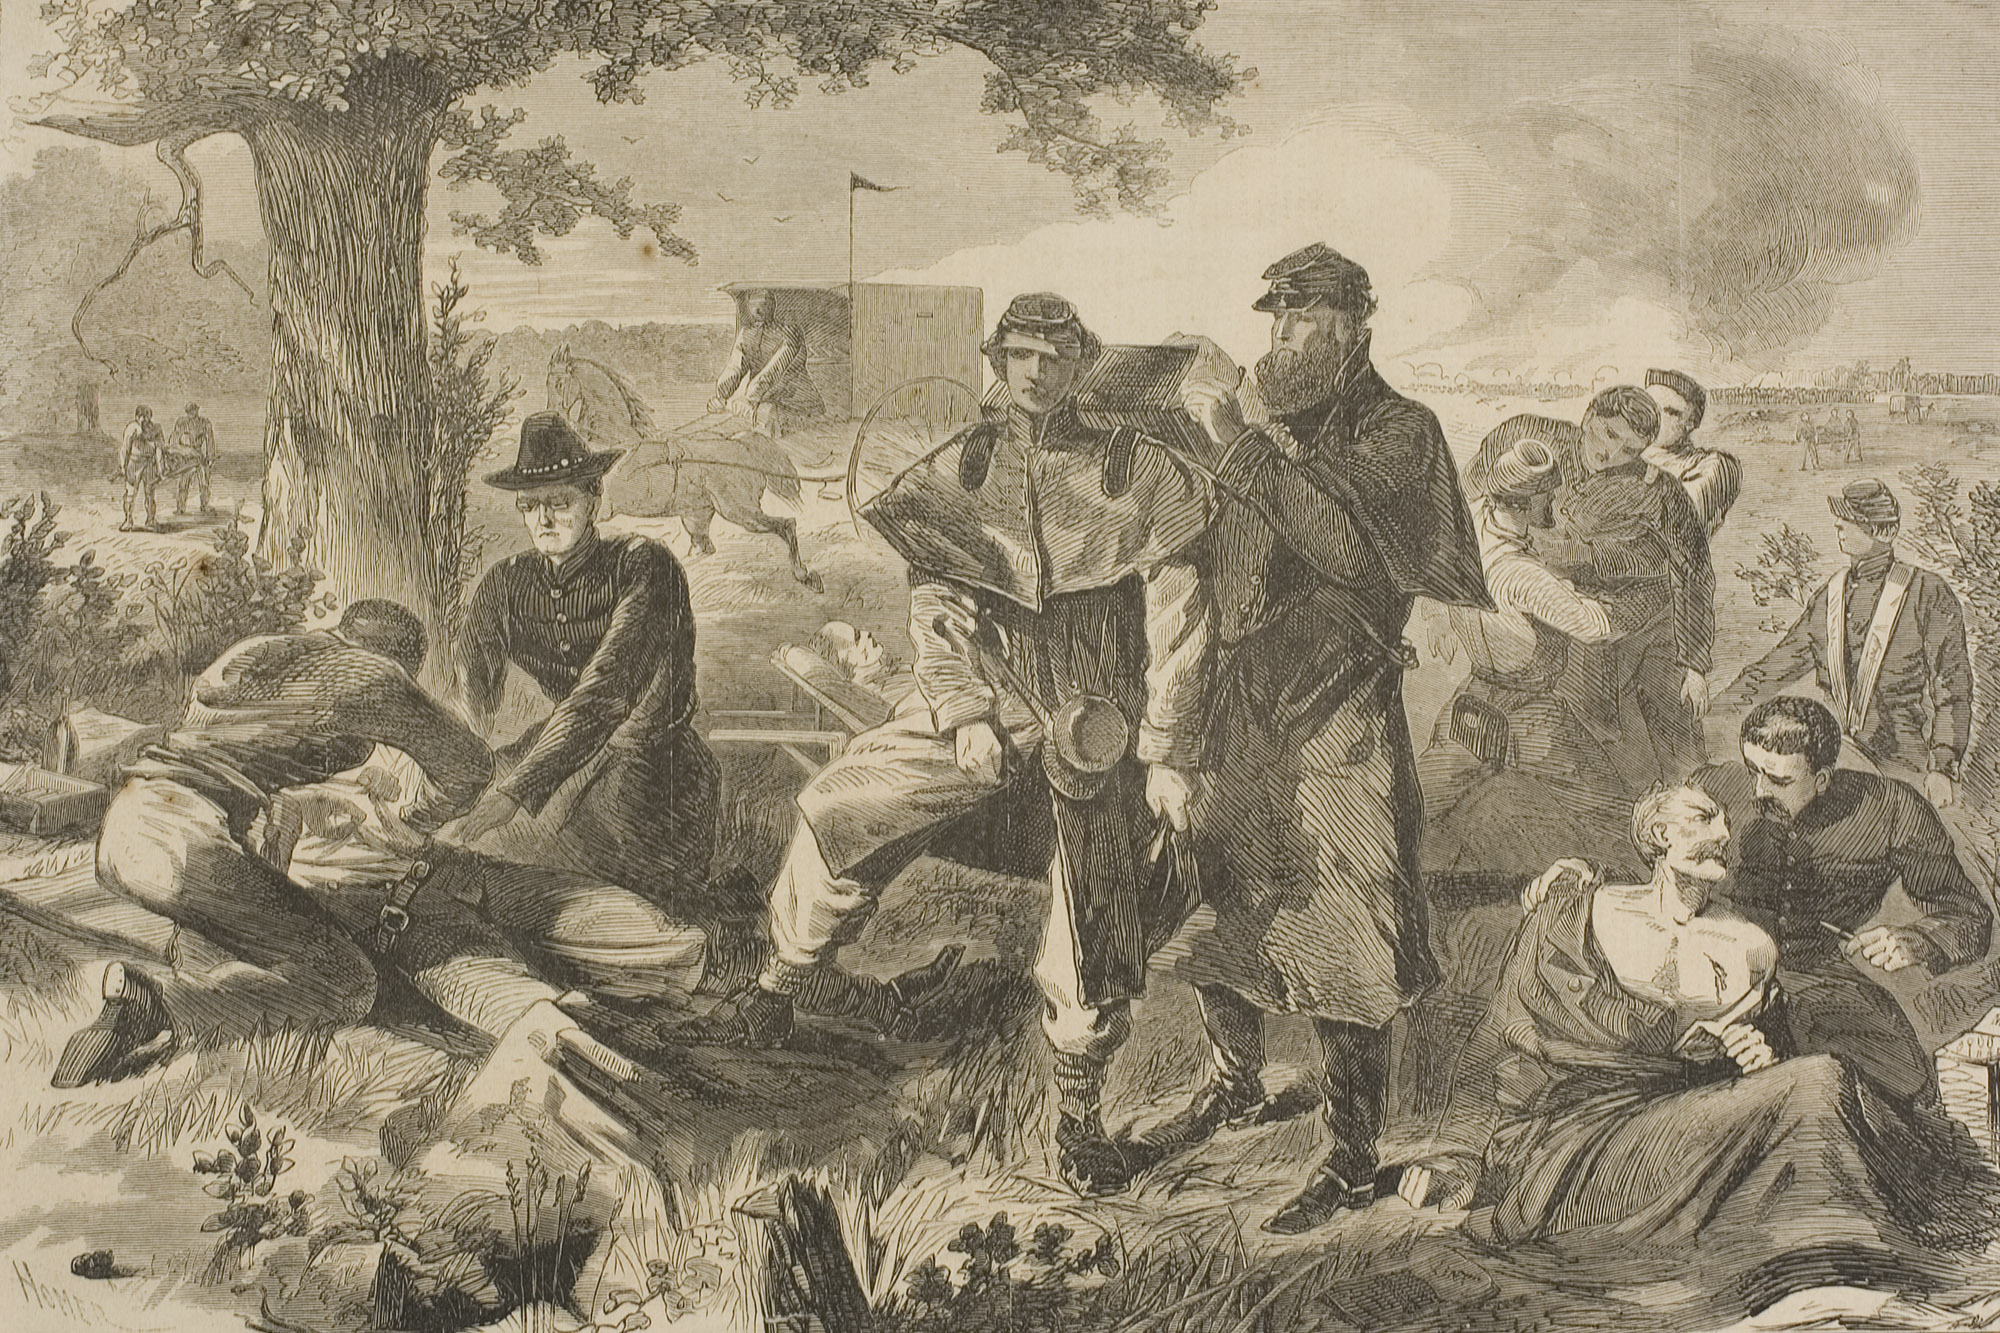 Winslow Homer, The Surgeon at Work at the Rear During an Engagement, 1862, wood engraving published by Harper’s Weekly July 12, 1862,, 9 3/16 x 13 13/16 inches (The Art Institute of Chicago)